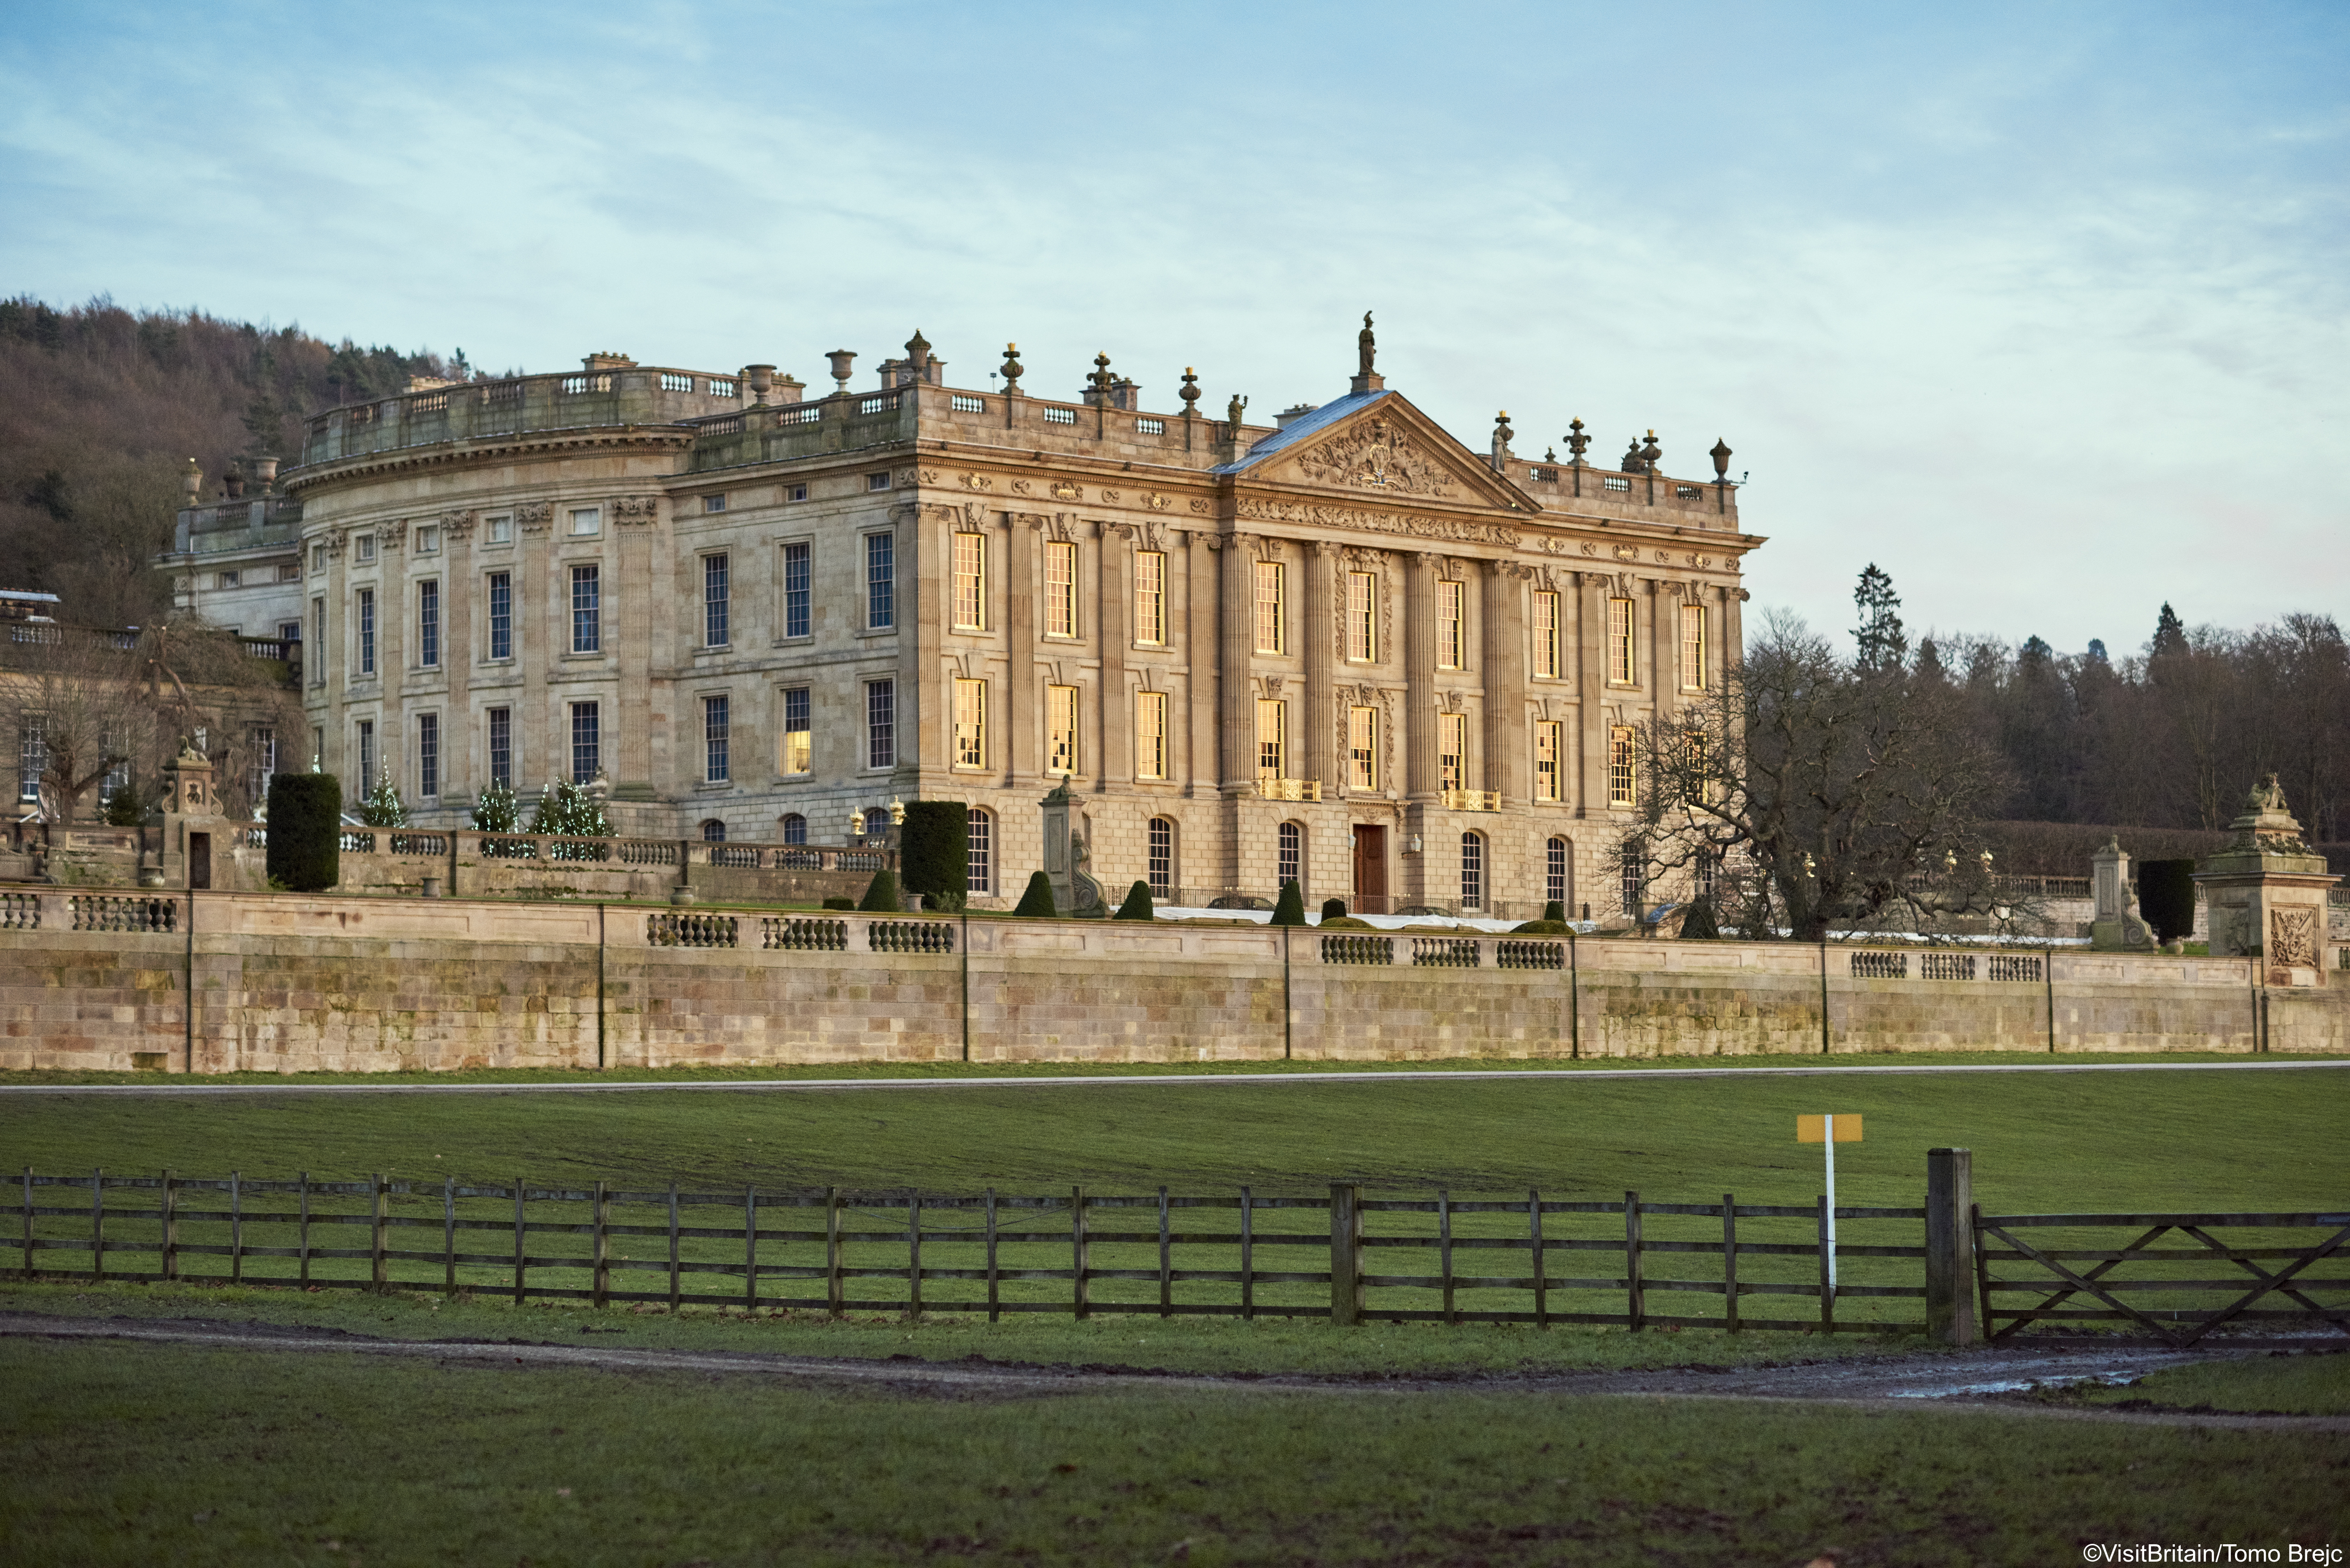 Chatsworth House in the Peak District, a famous historical landmark.